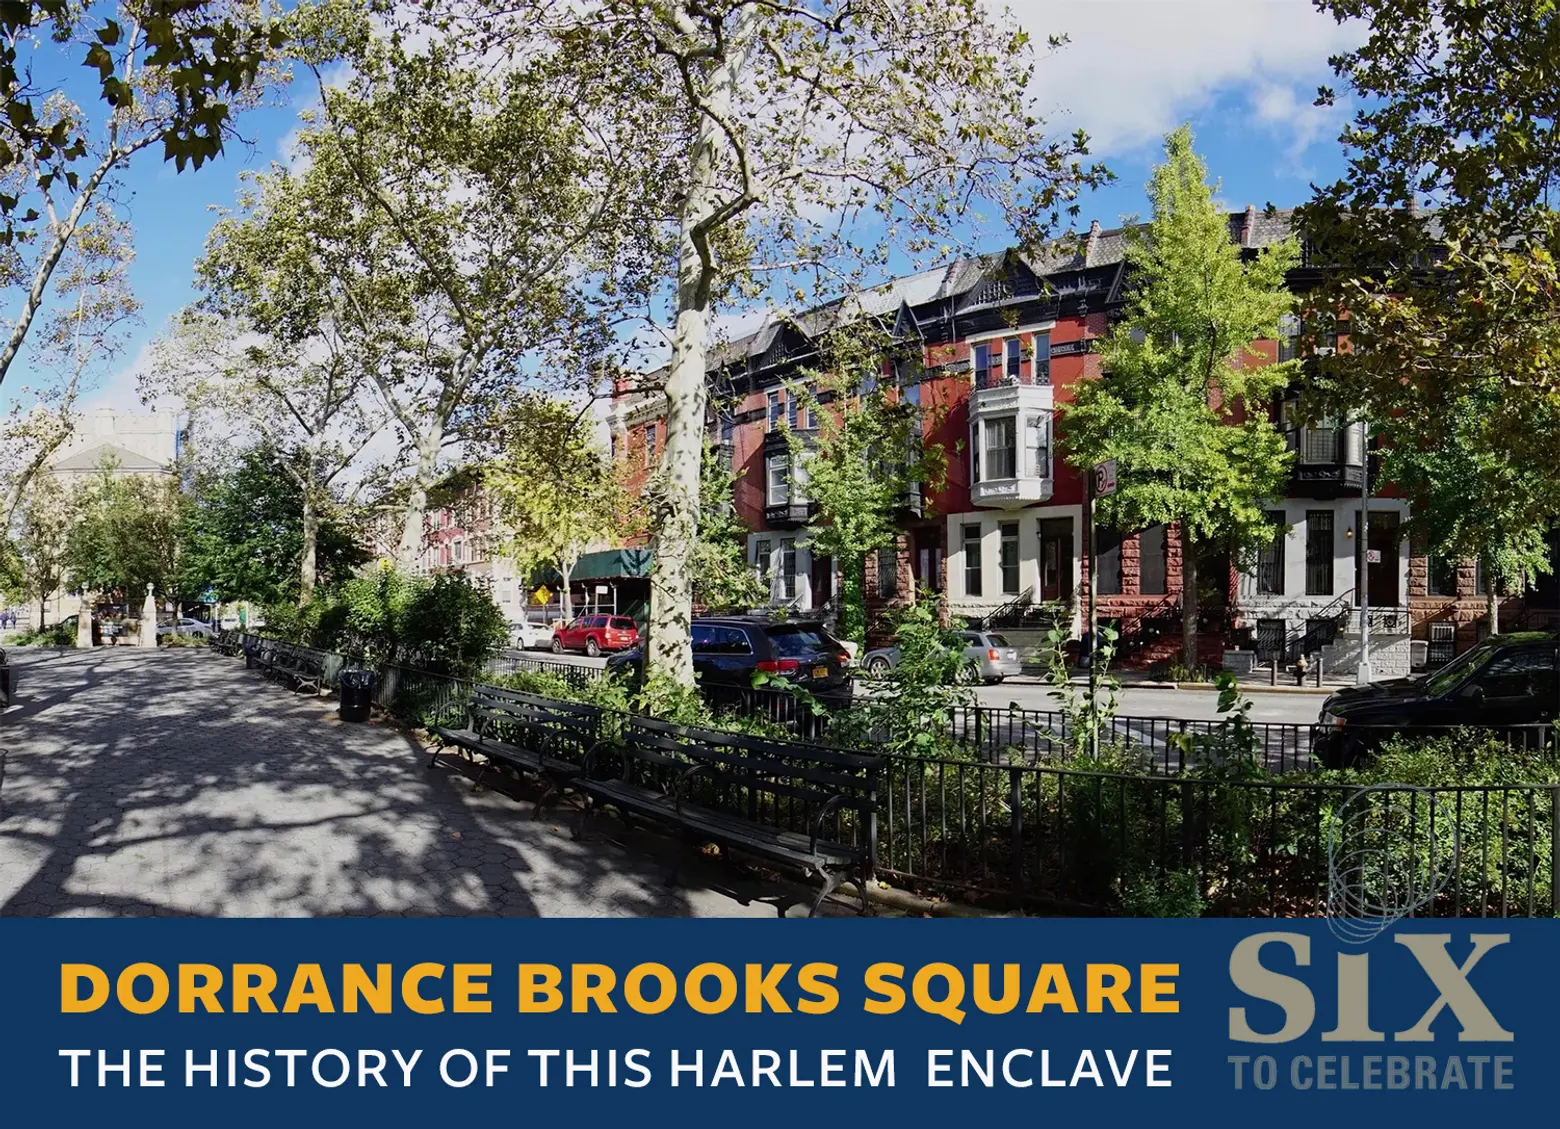 Dorrance Brooks Square: A Harlem enclave with World War and civil rights ties